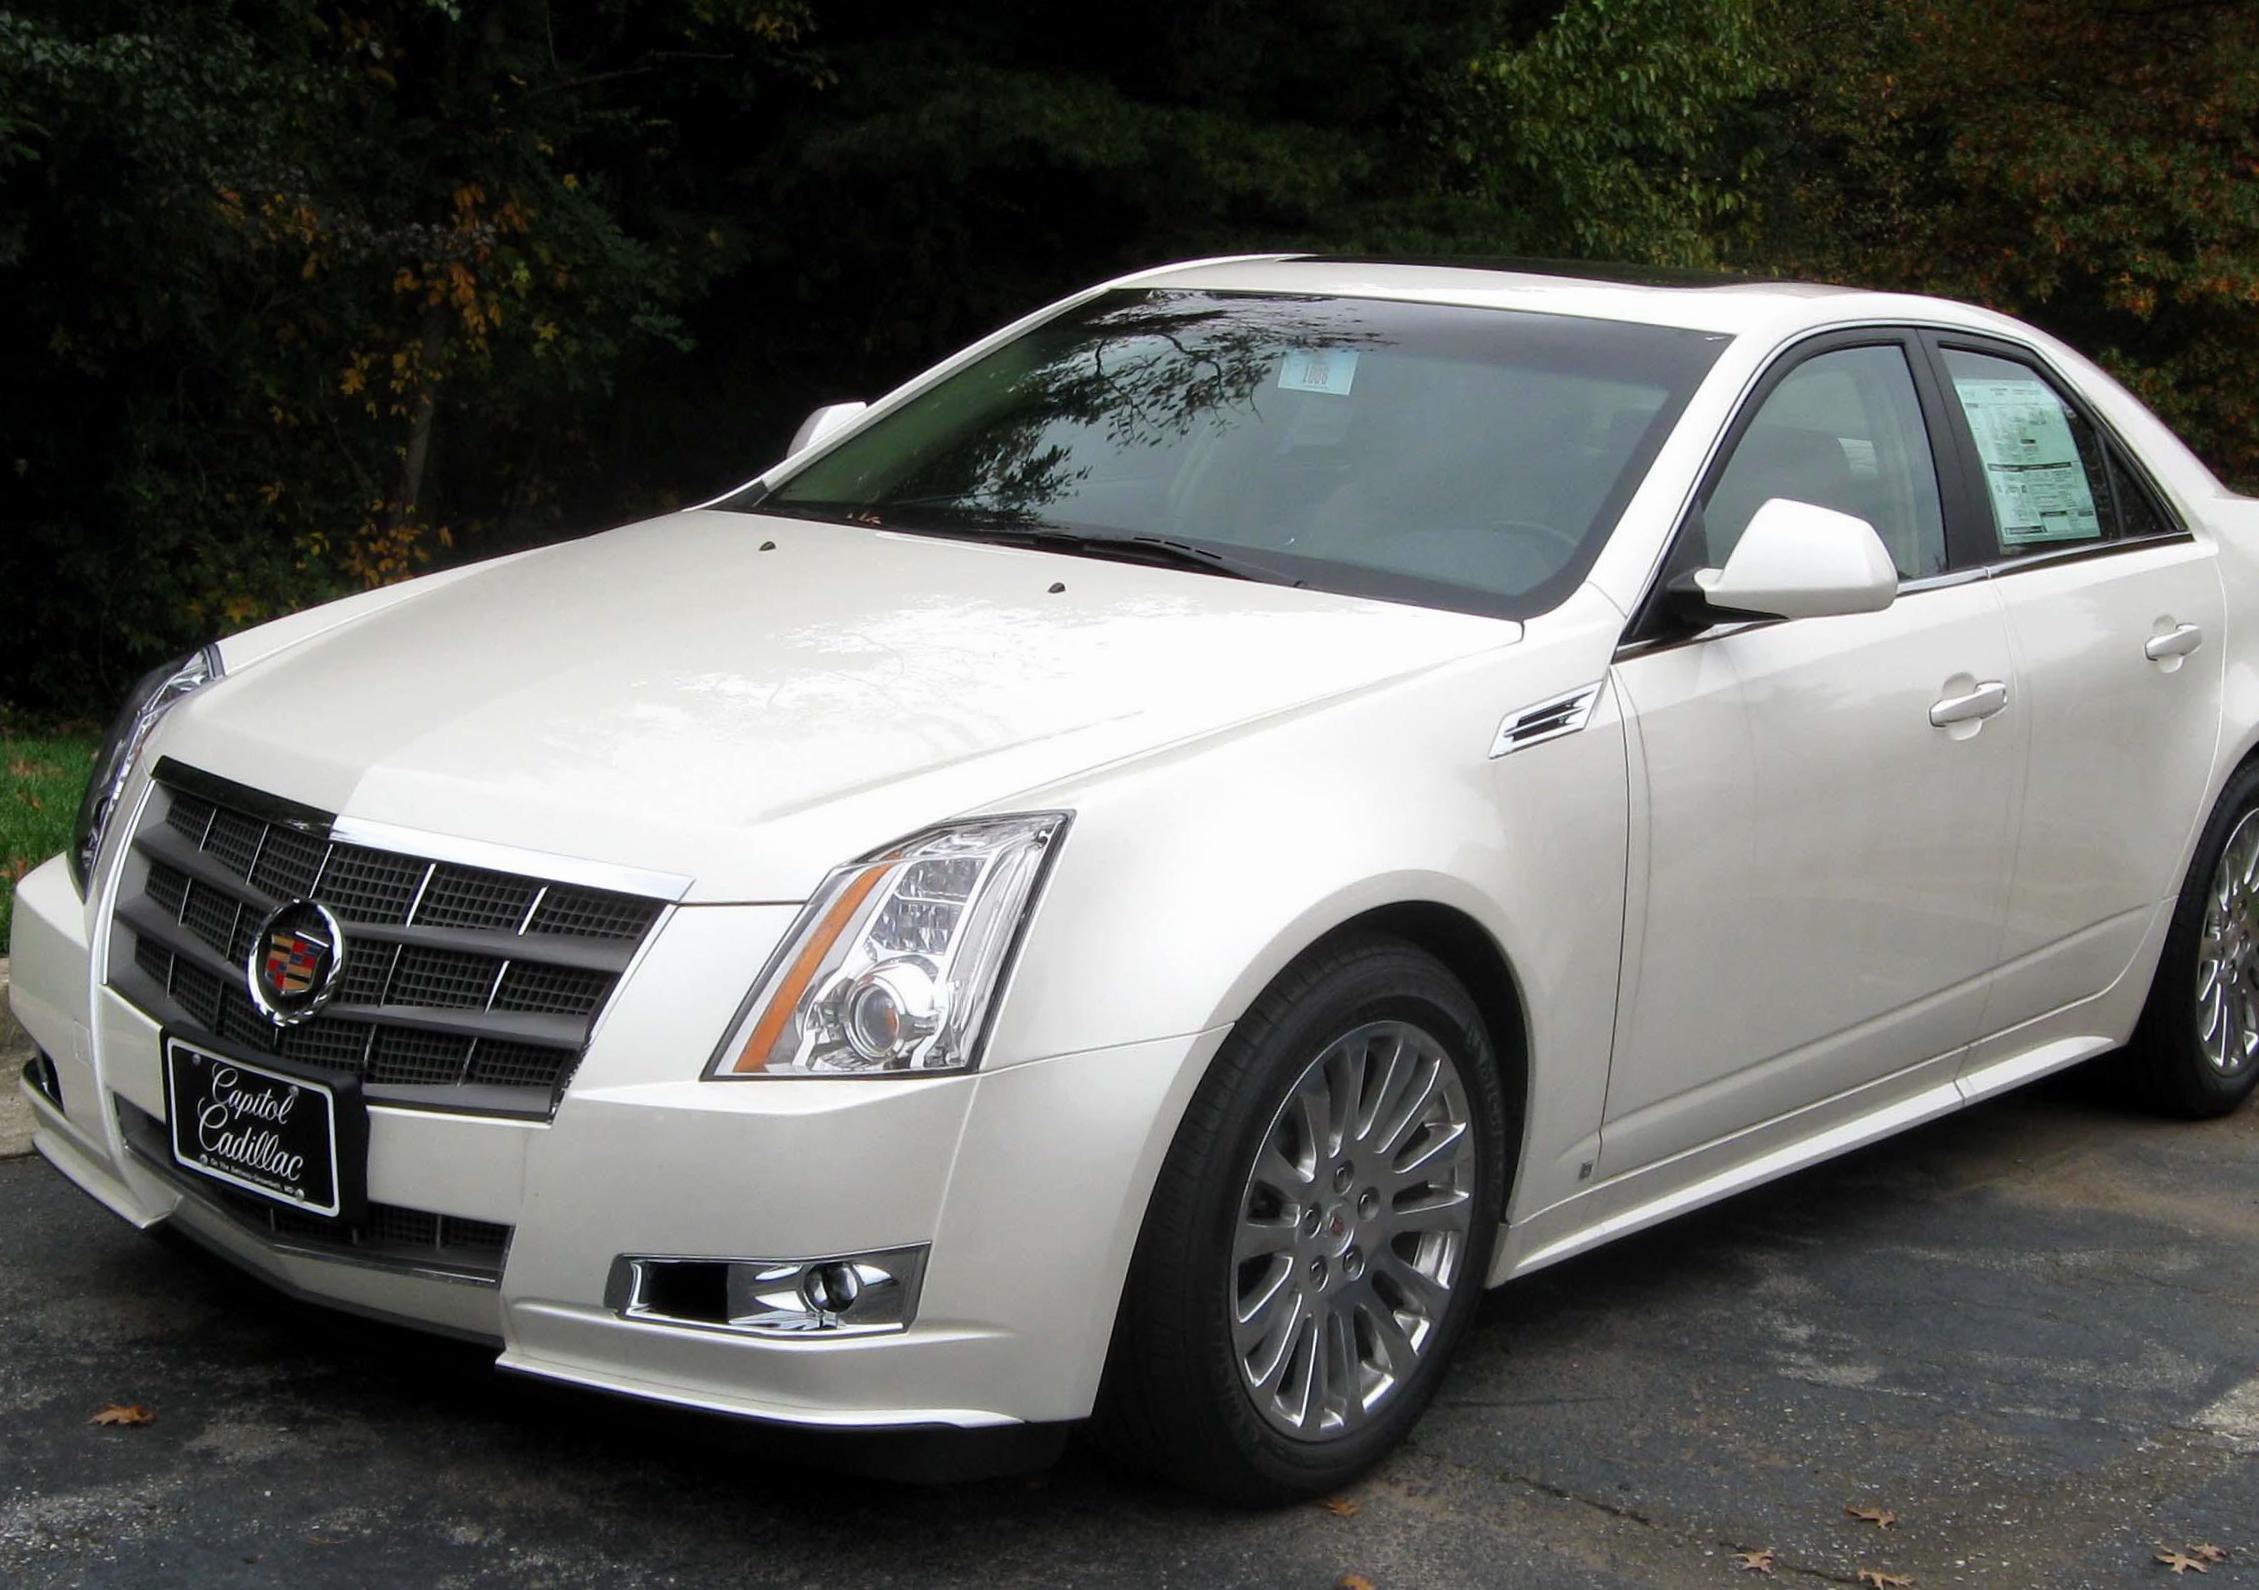 Cadillac CTS Coupe specs pickup